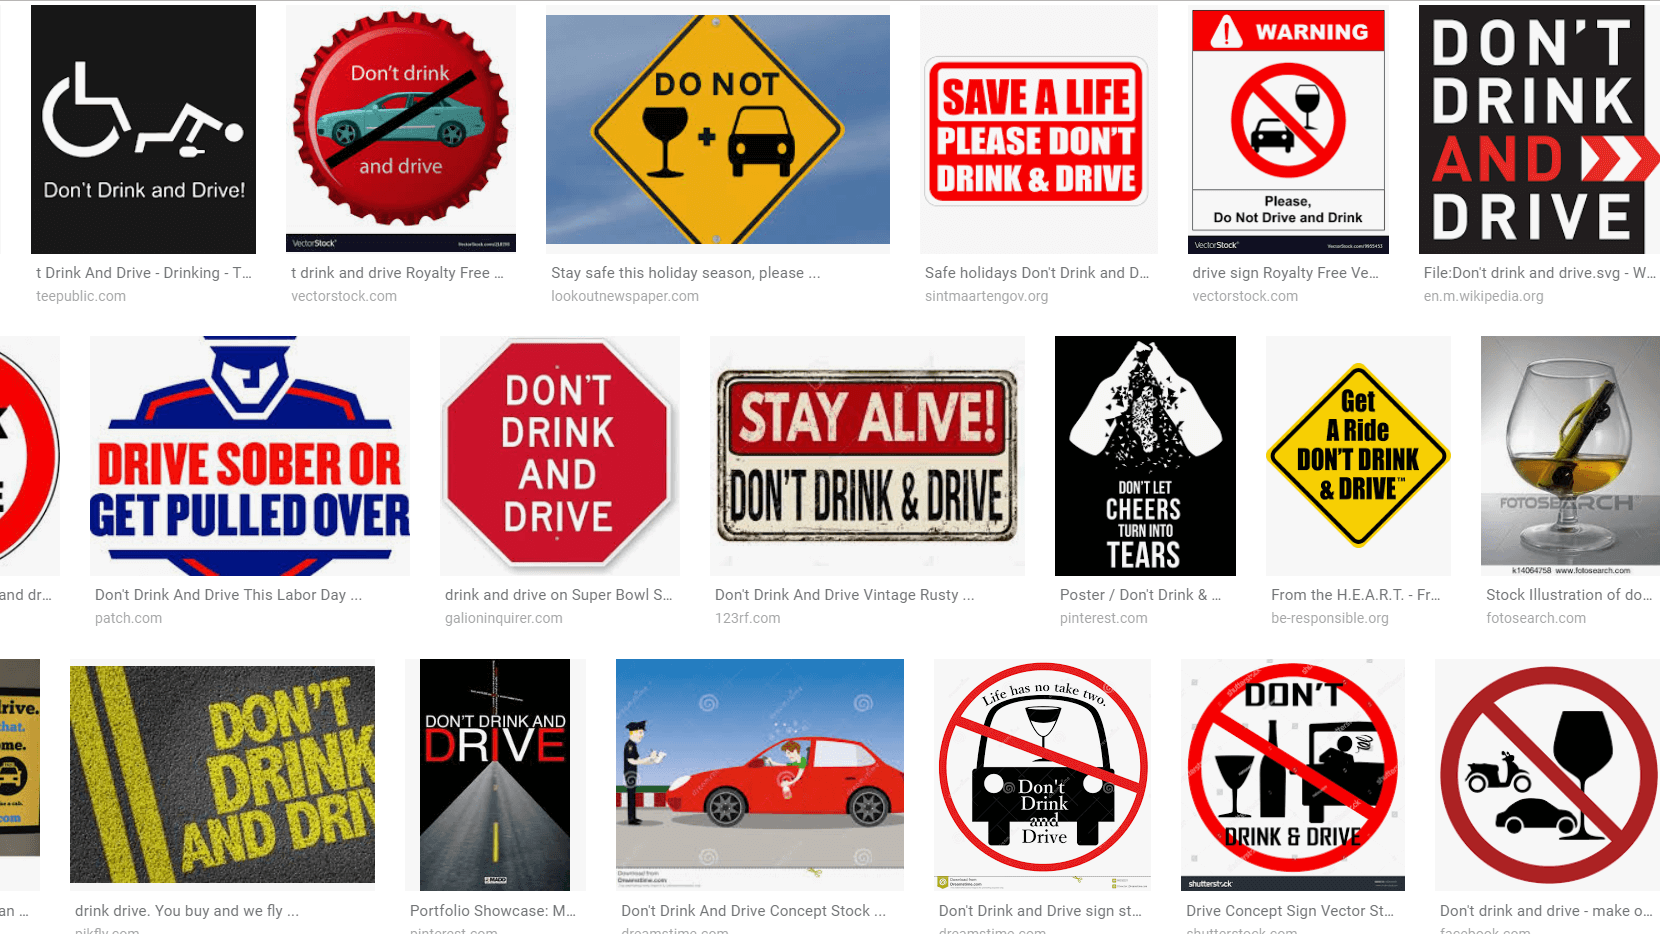 don't drink and drive - google image search